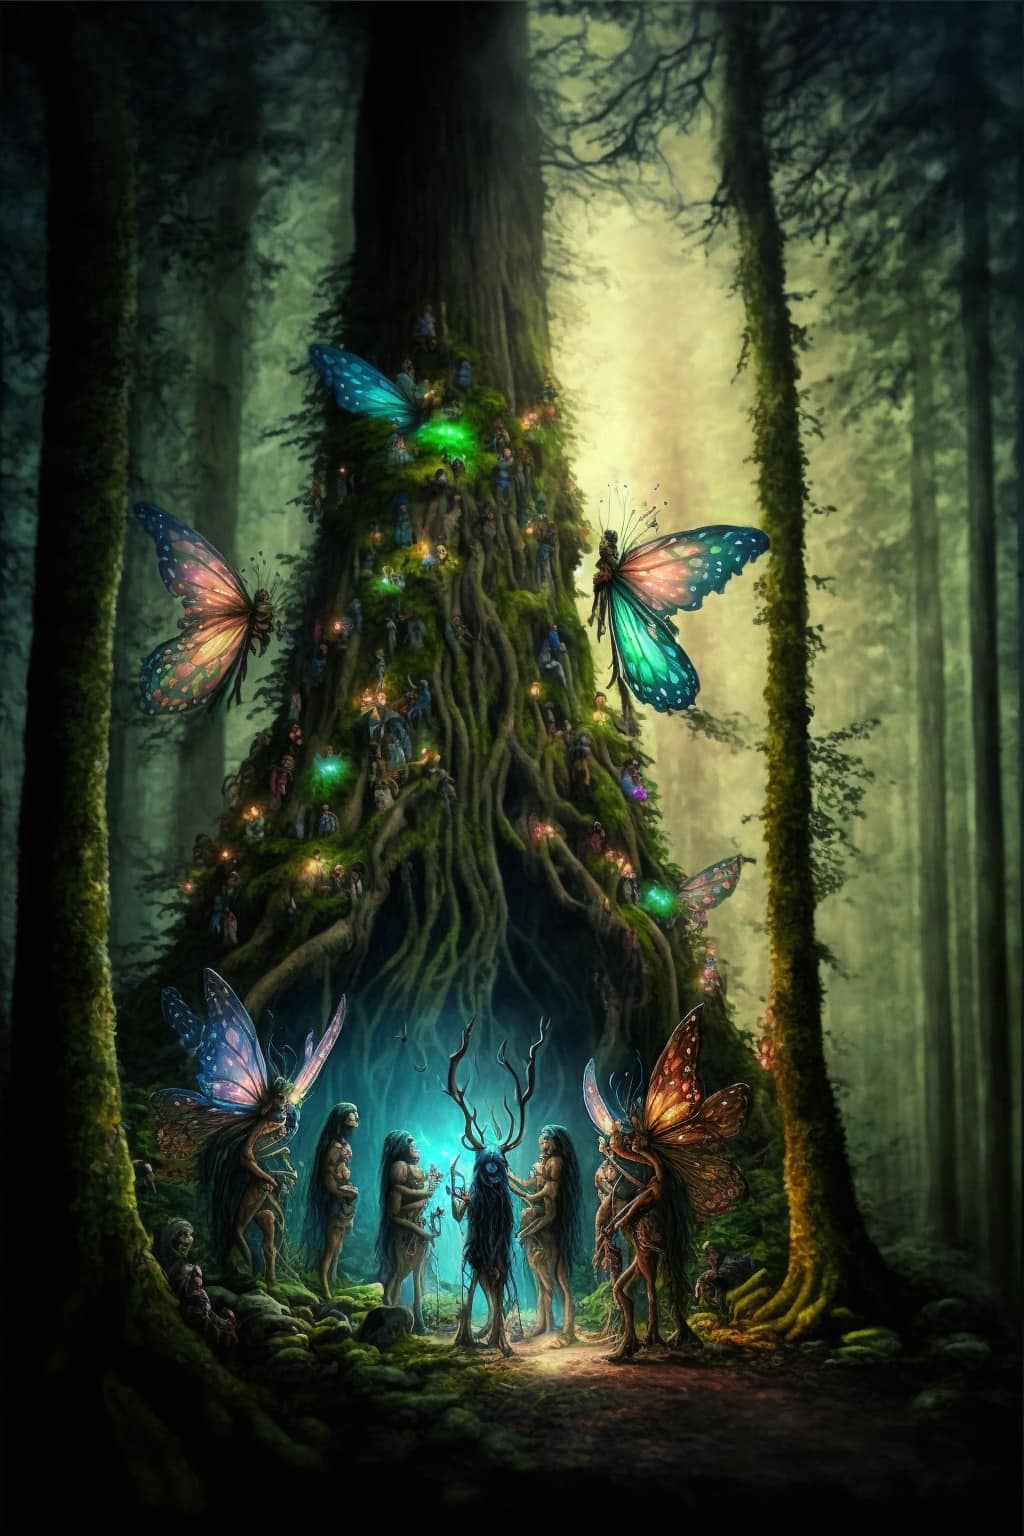 The Faerie Tree